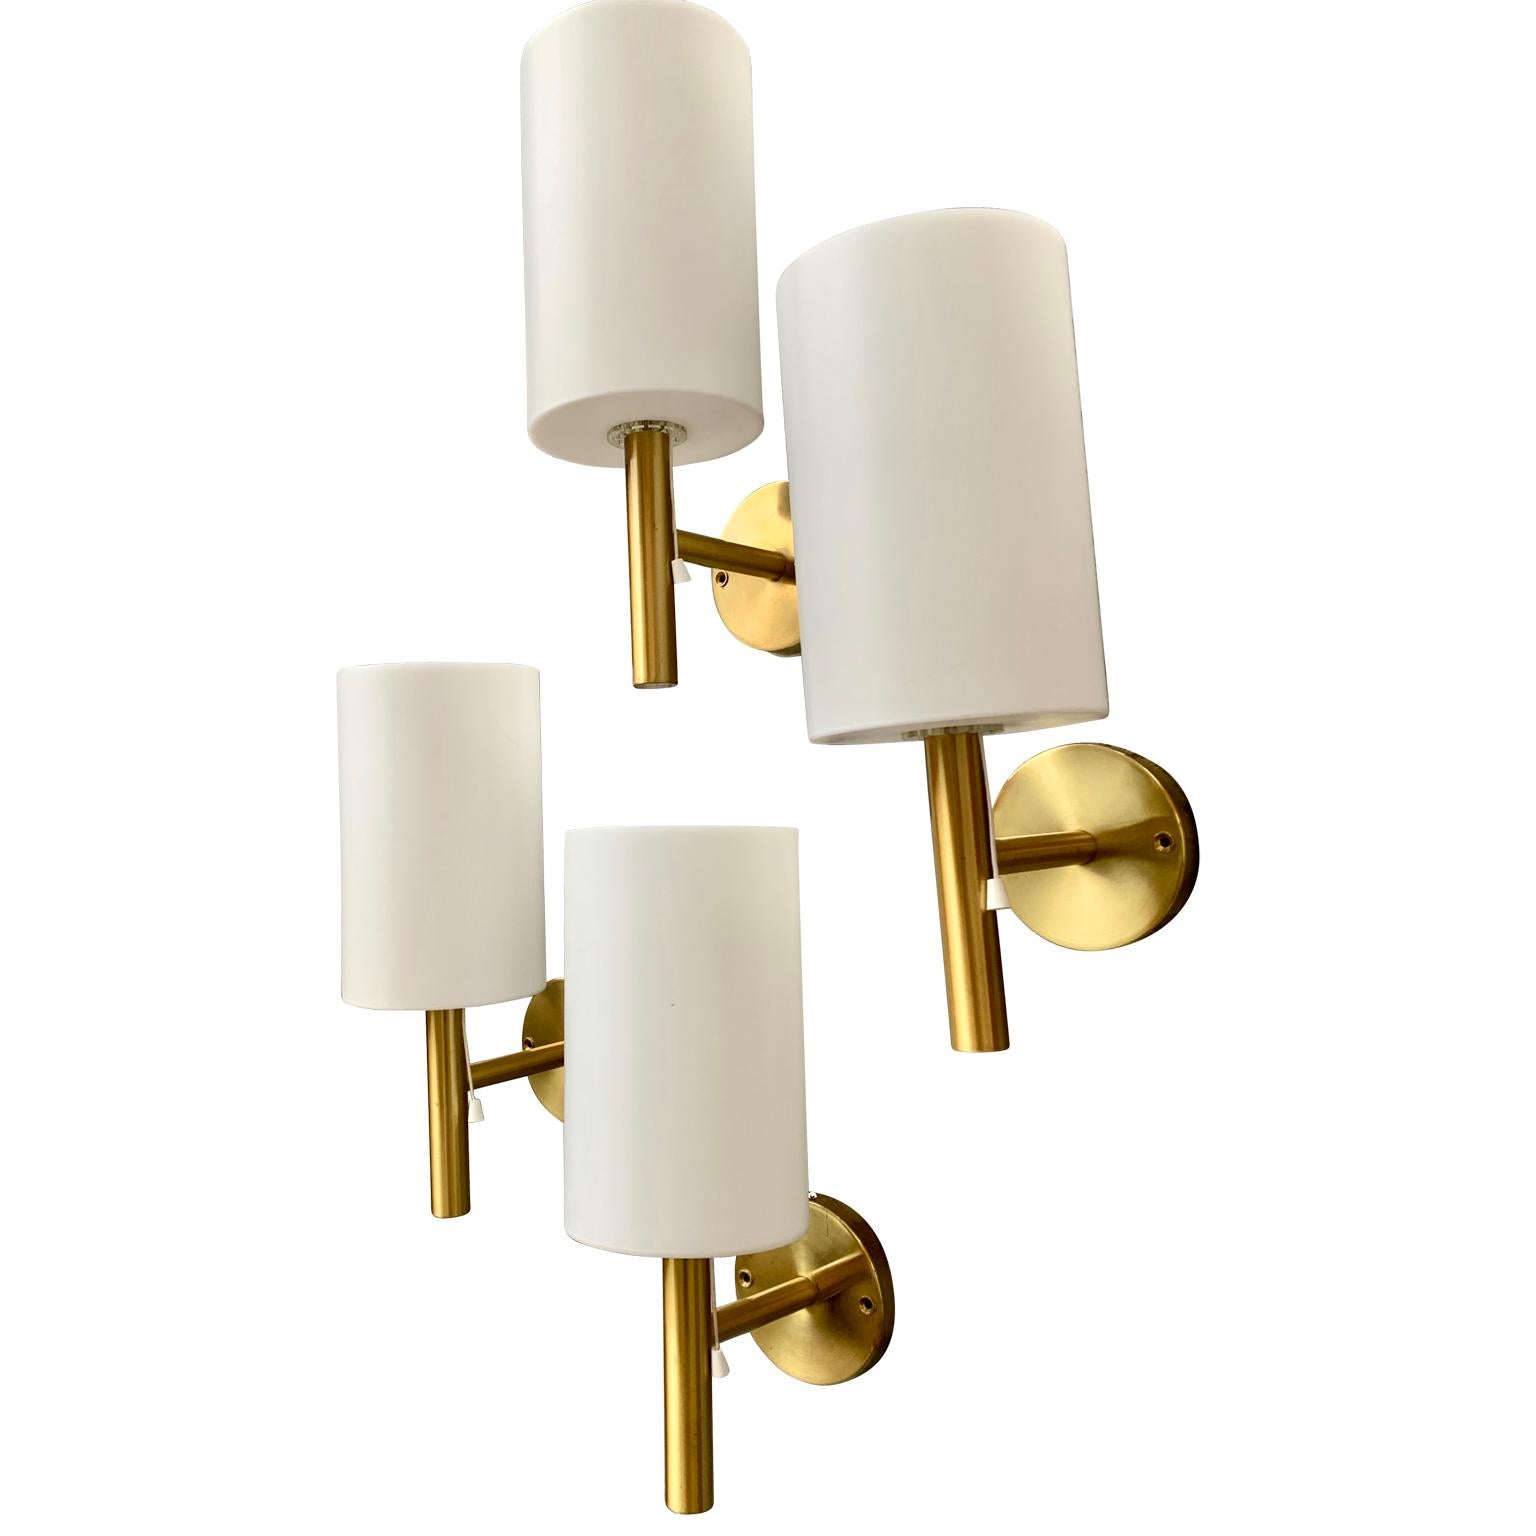 4 Swedish Mid-Century Modern frosted acrylic and brass wall light sconces.
Designed by Uno & Östen Kristiansson for Luxus in Vittsjö, Sweden.
Sold as a pair of two.